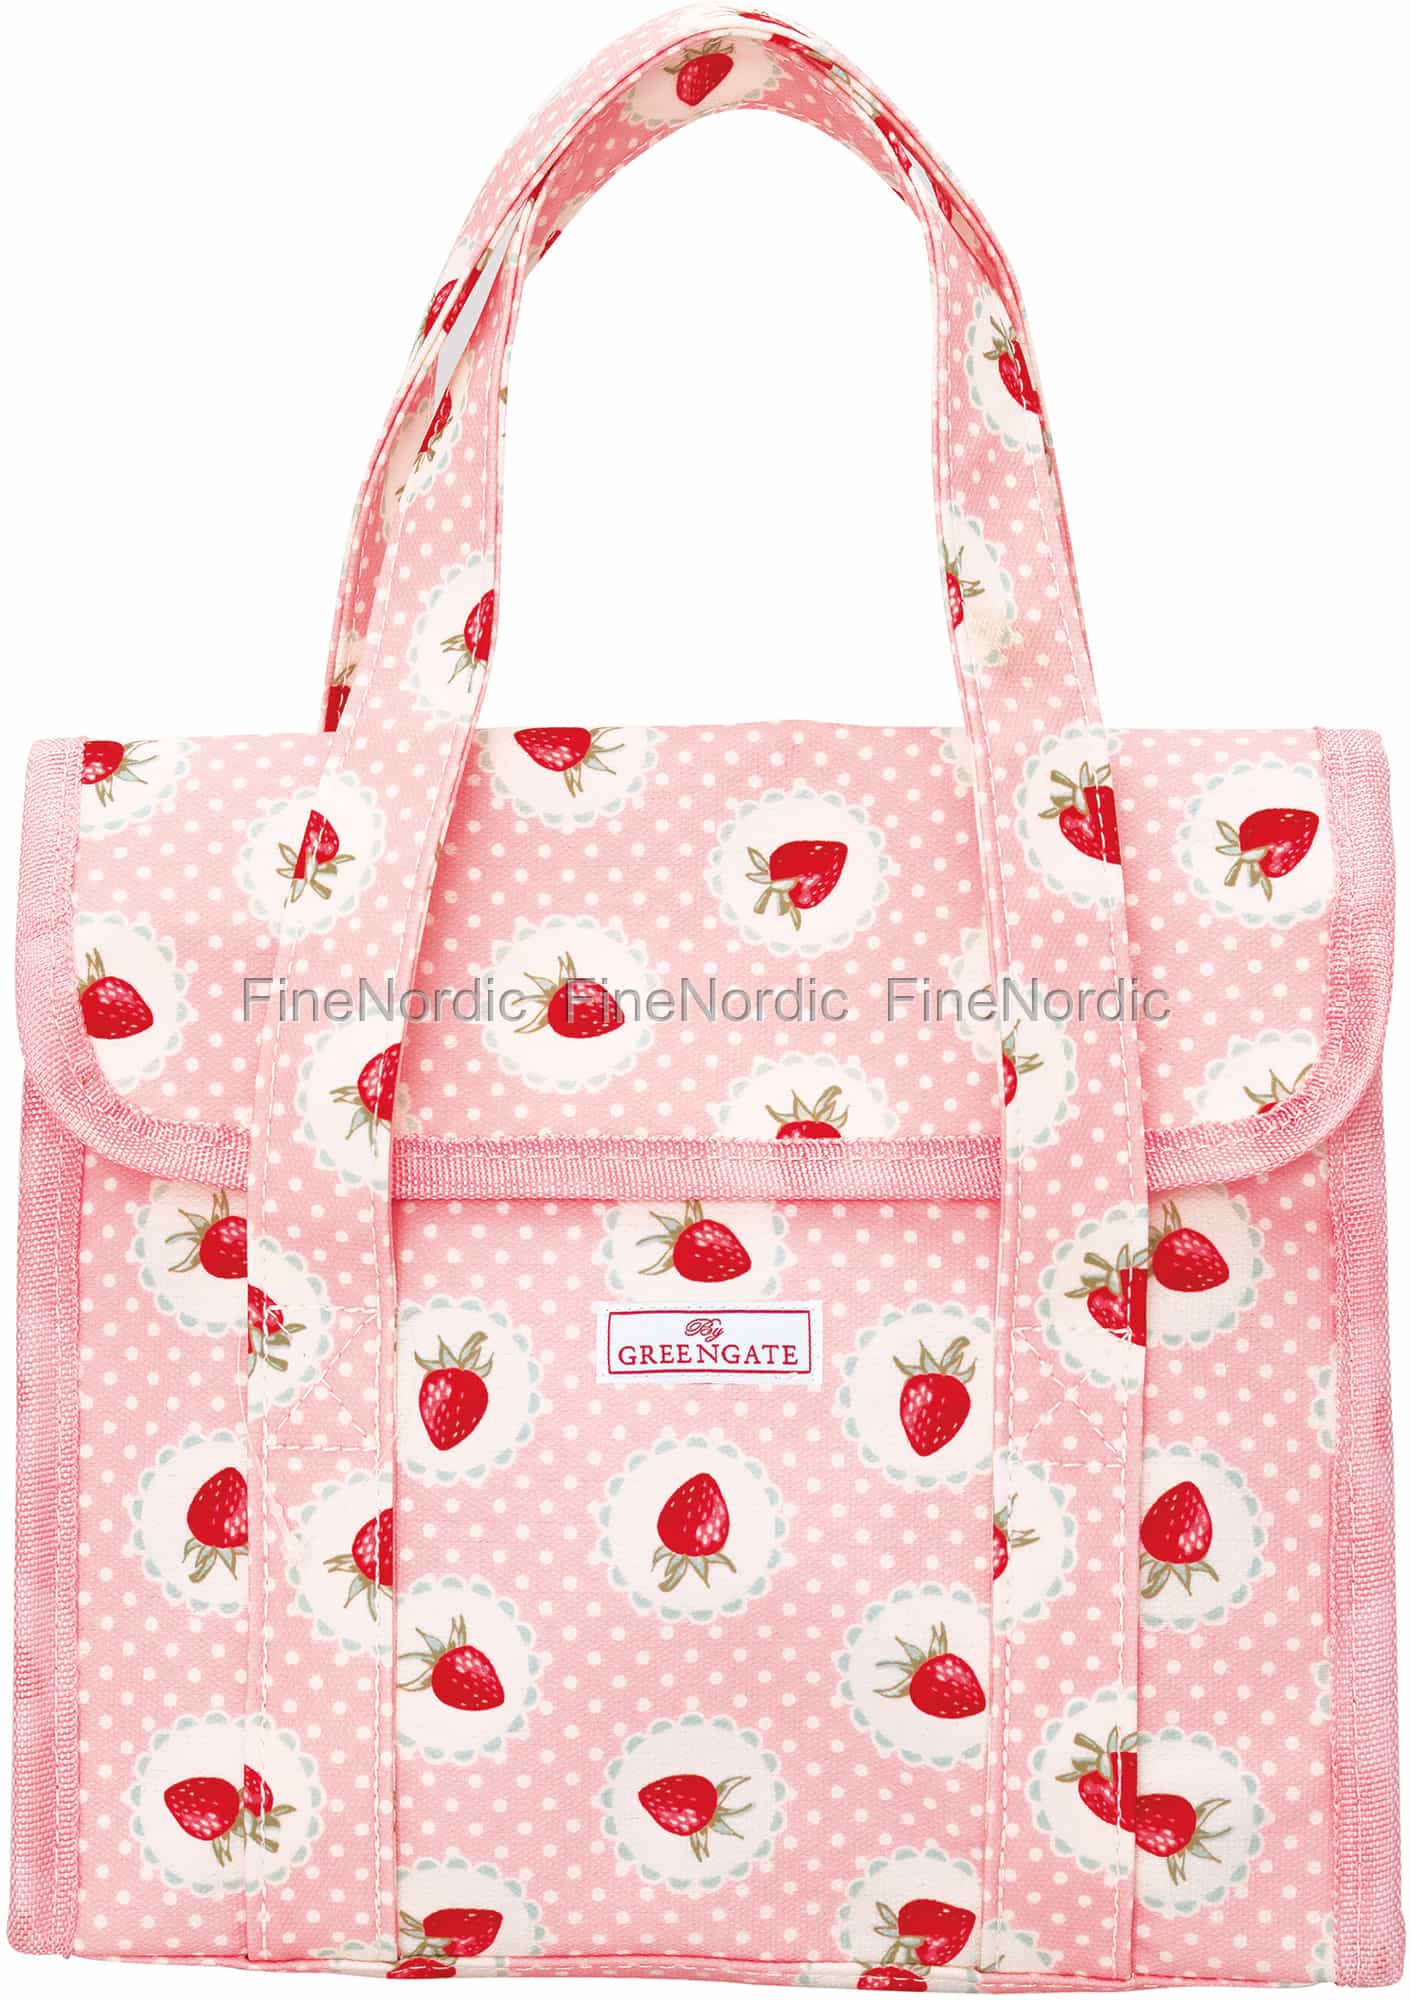 GreenGate Lunchbag Small Strawberry Pale Pink